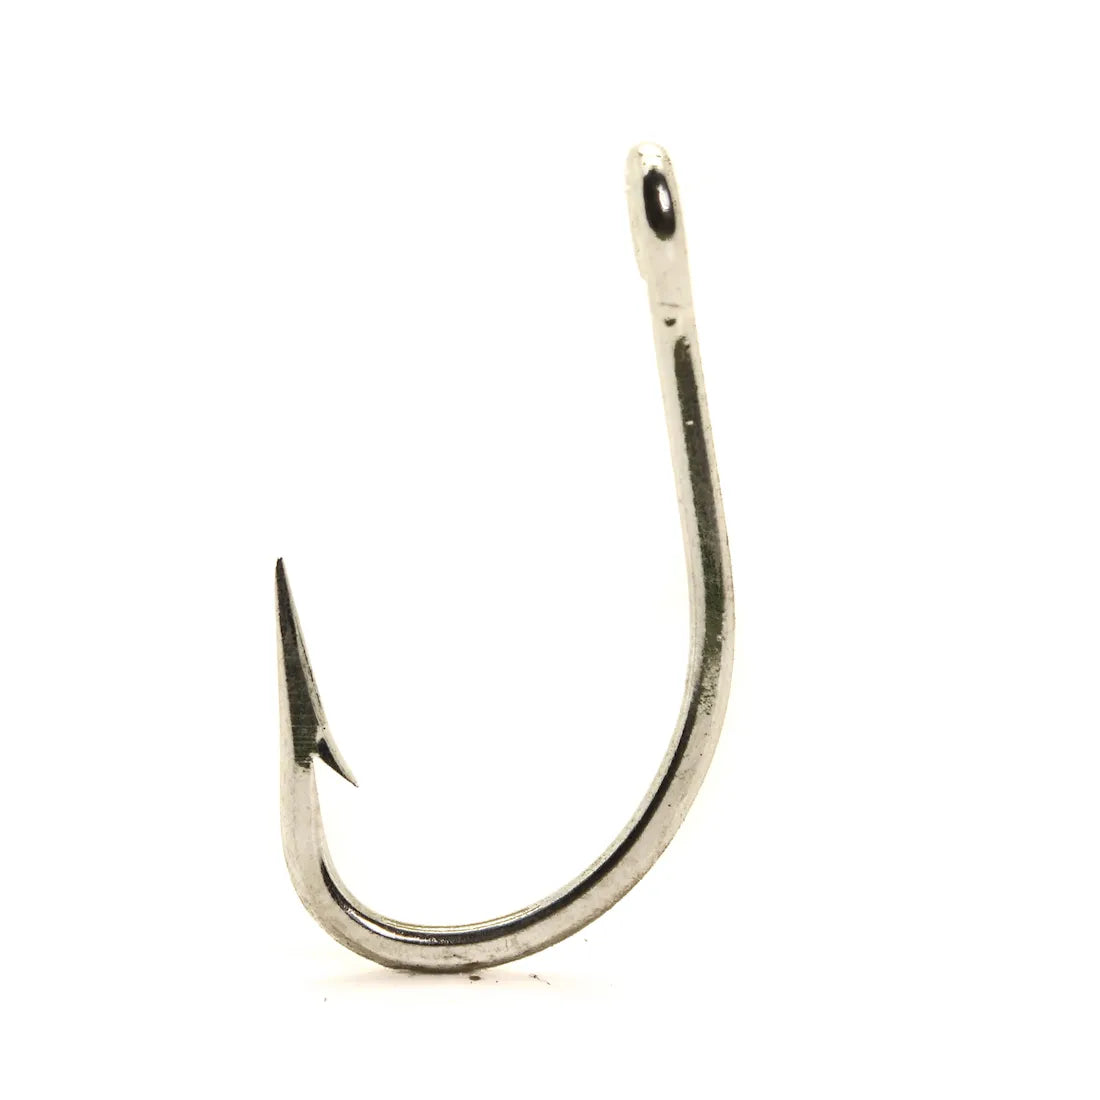 100 MUSTAD HOOKS 5/0 OPEN soft EYE O'SHAUGHNESSY TINNED Make Lures